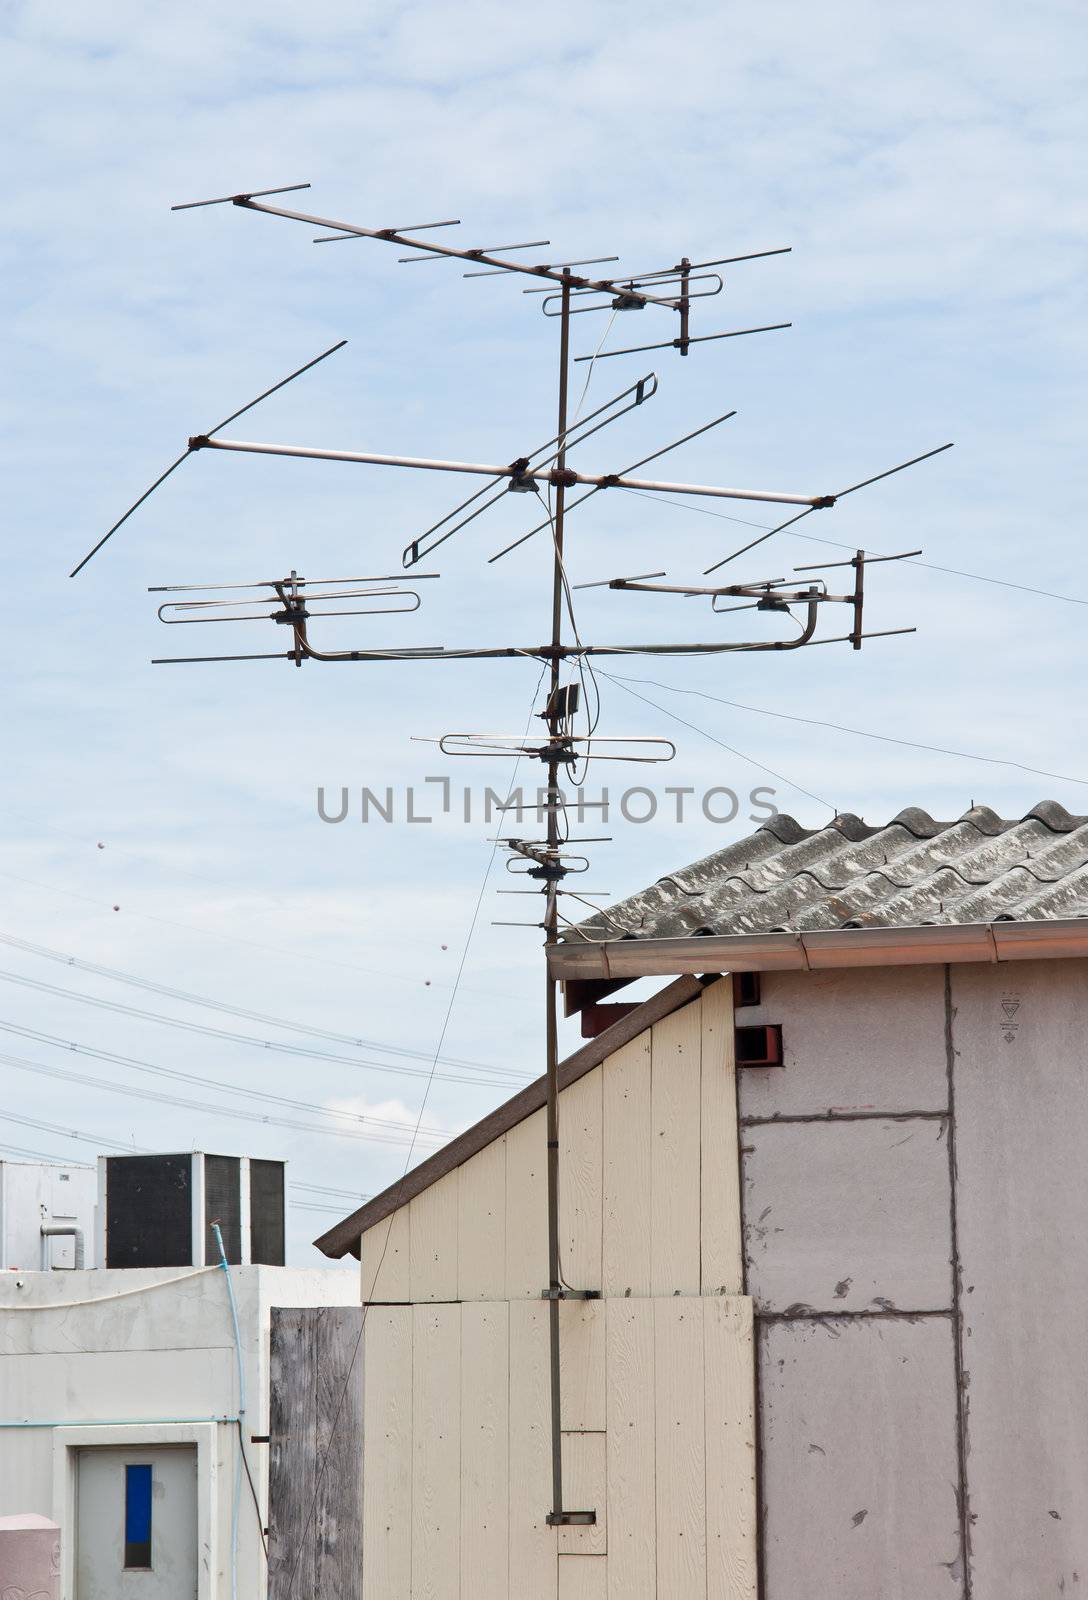 TV antennas are mounted on the roof.